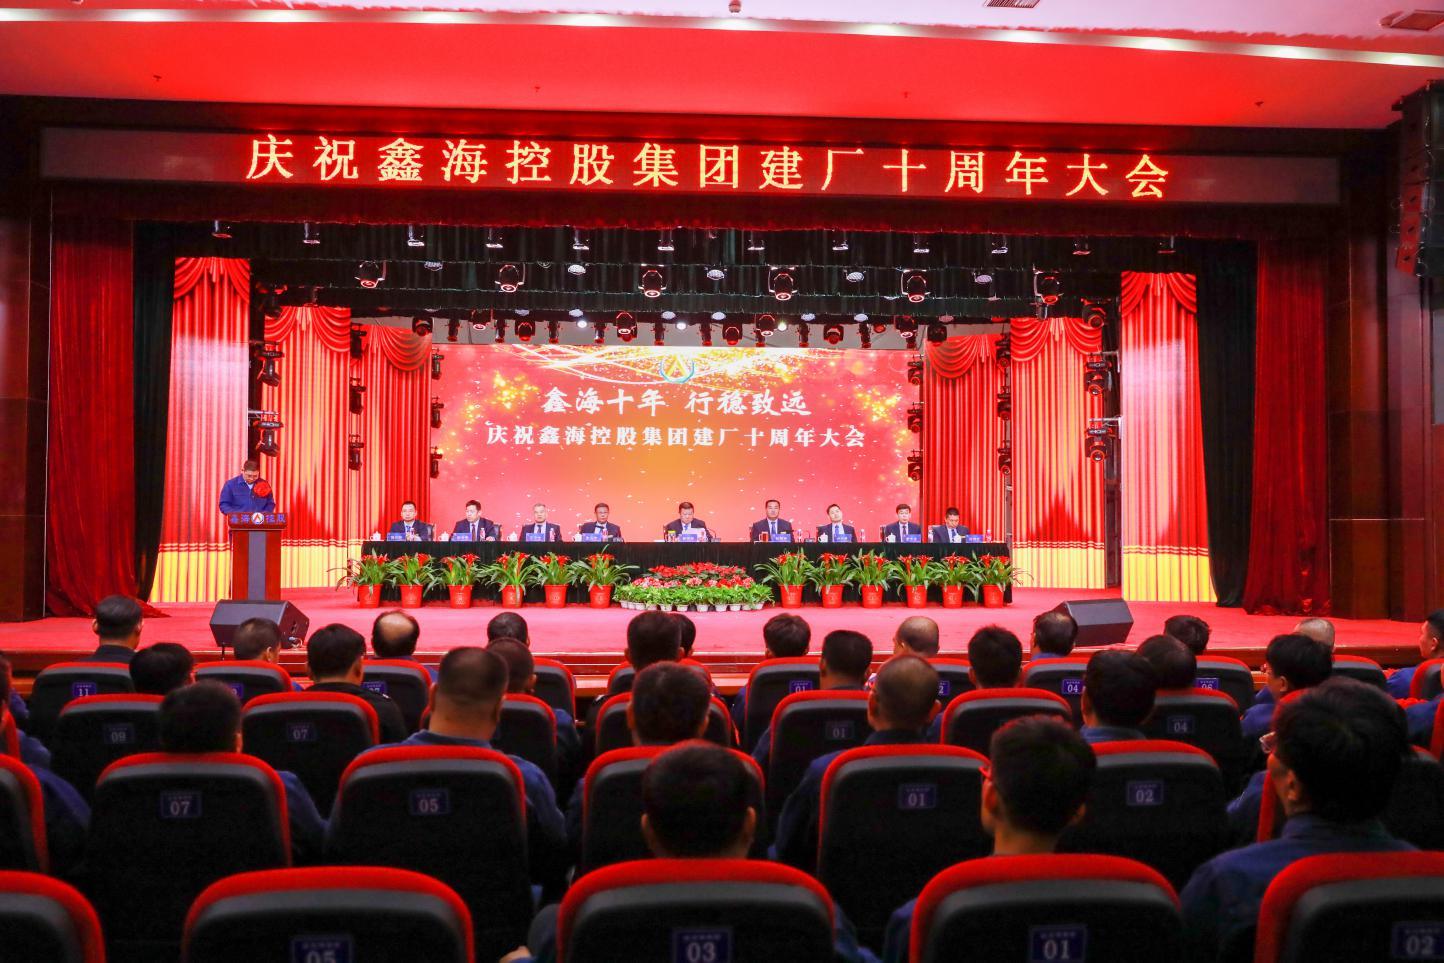 Xinhai Ten Years of Steady Zhiyuan | Xinhai Holding Group Held a Meeting to Celebrate the 10th Anniversary of the Establishment of the Factory